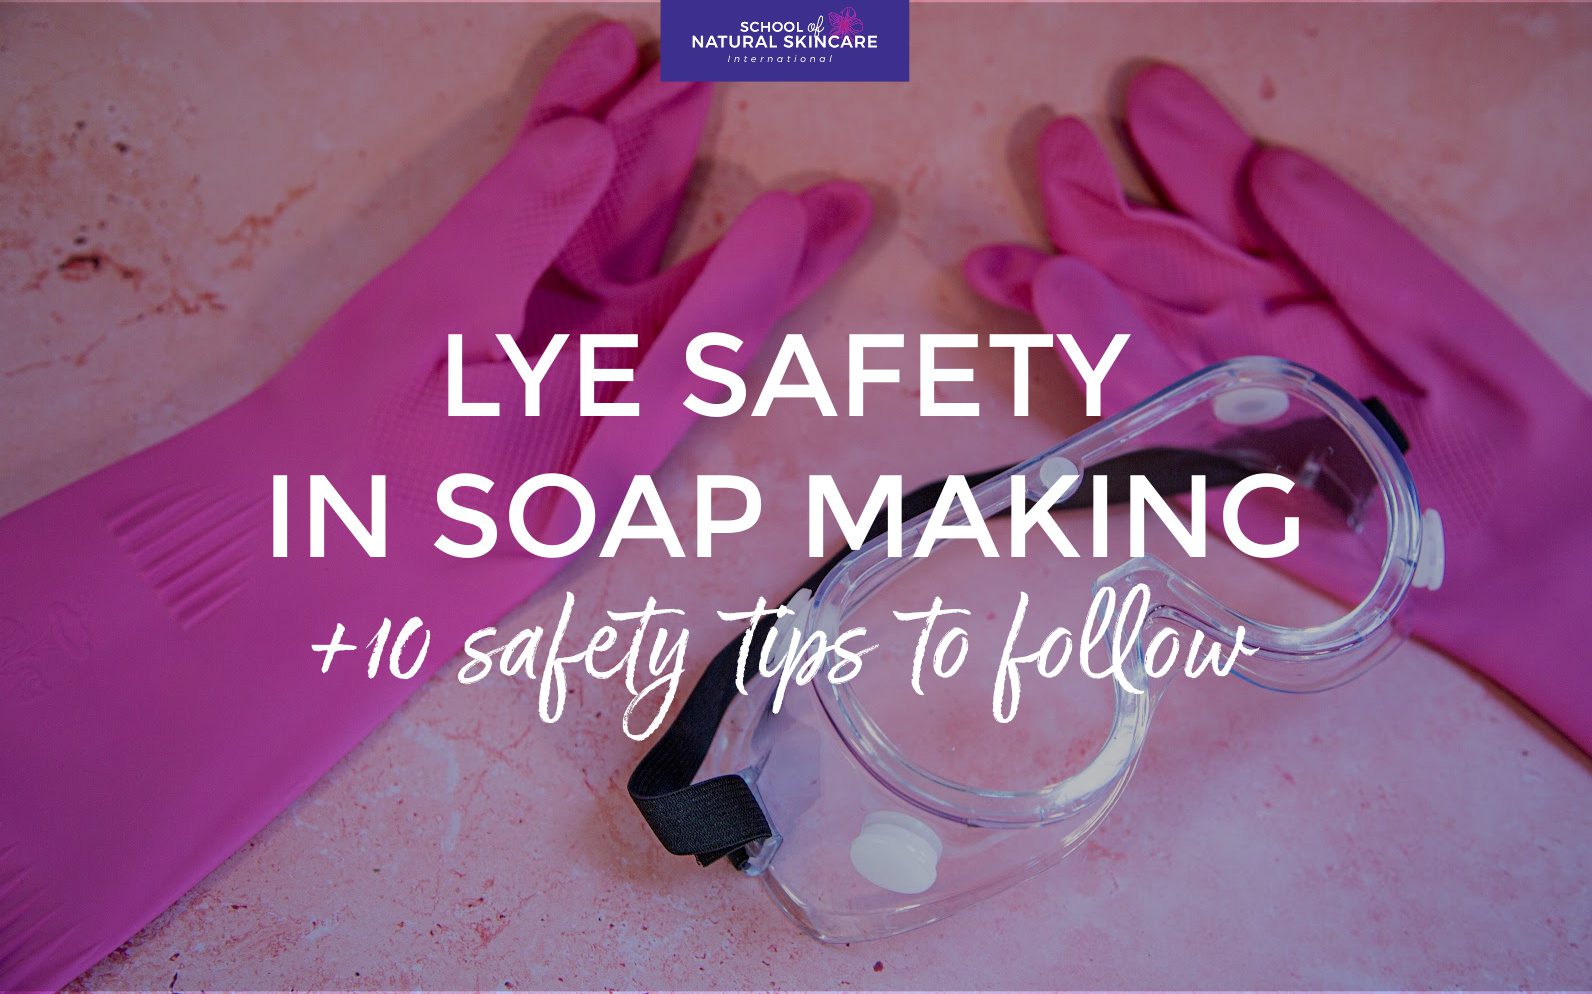 Always protect your face and hands when working with Sodium Hydroxide